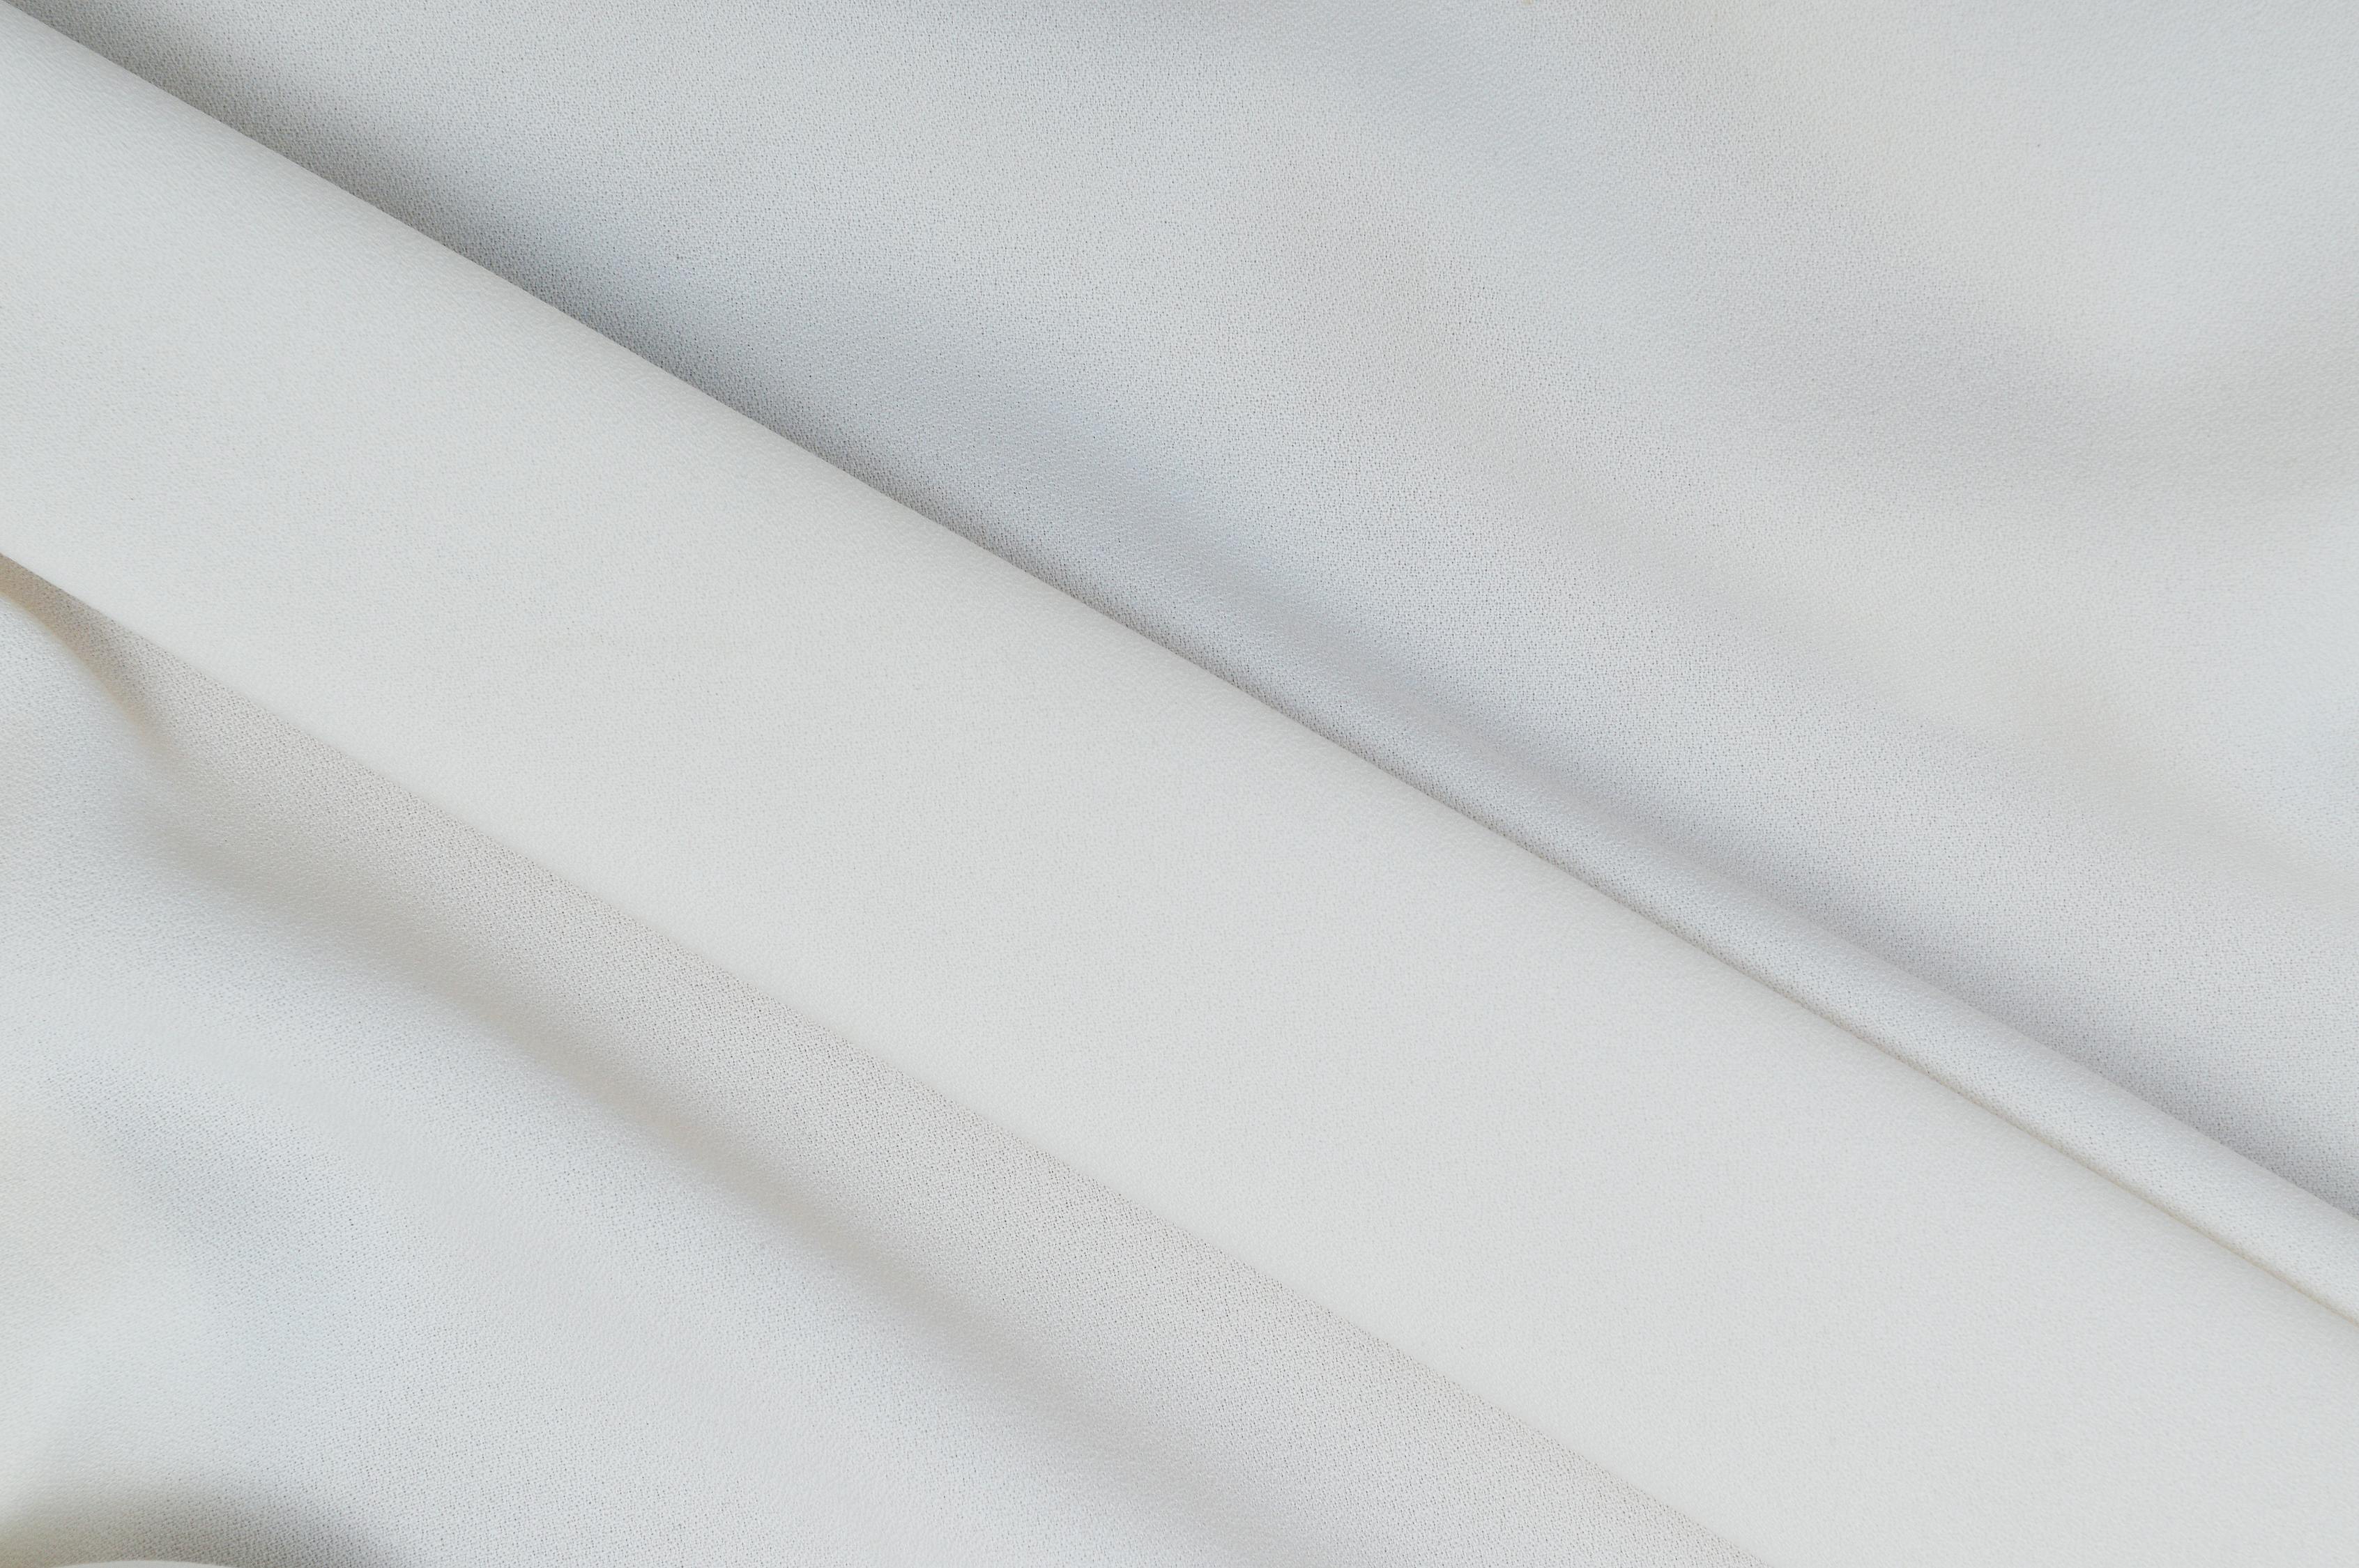 Close-Up Photo of a Smooth White Textile · Free Stock Photo